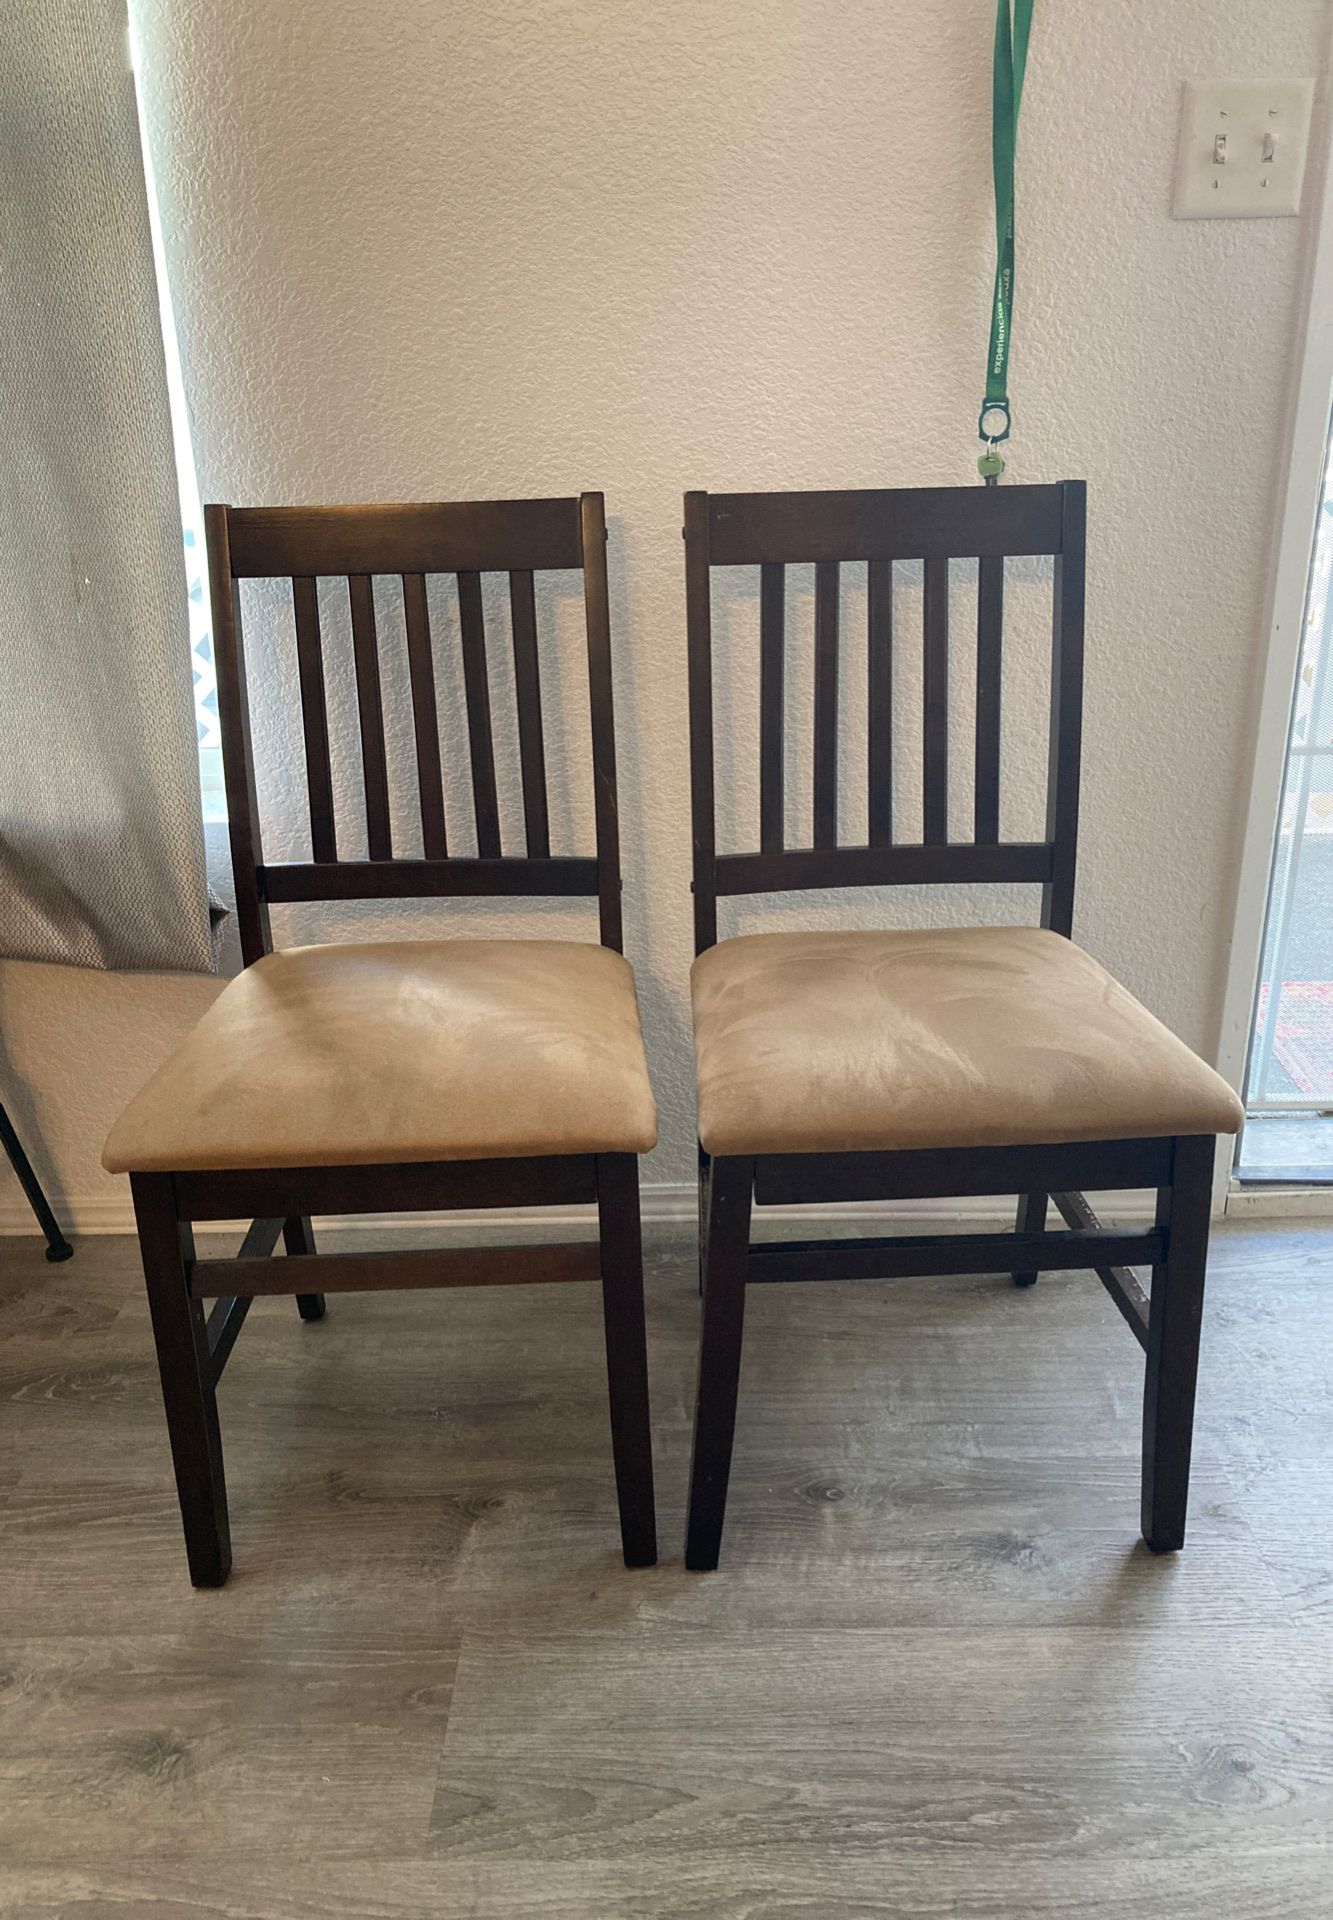 2 dining chairs for dining table 30. Firm for both